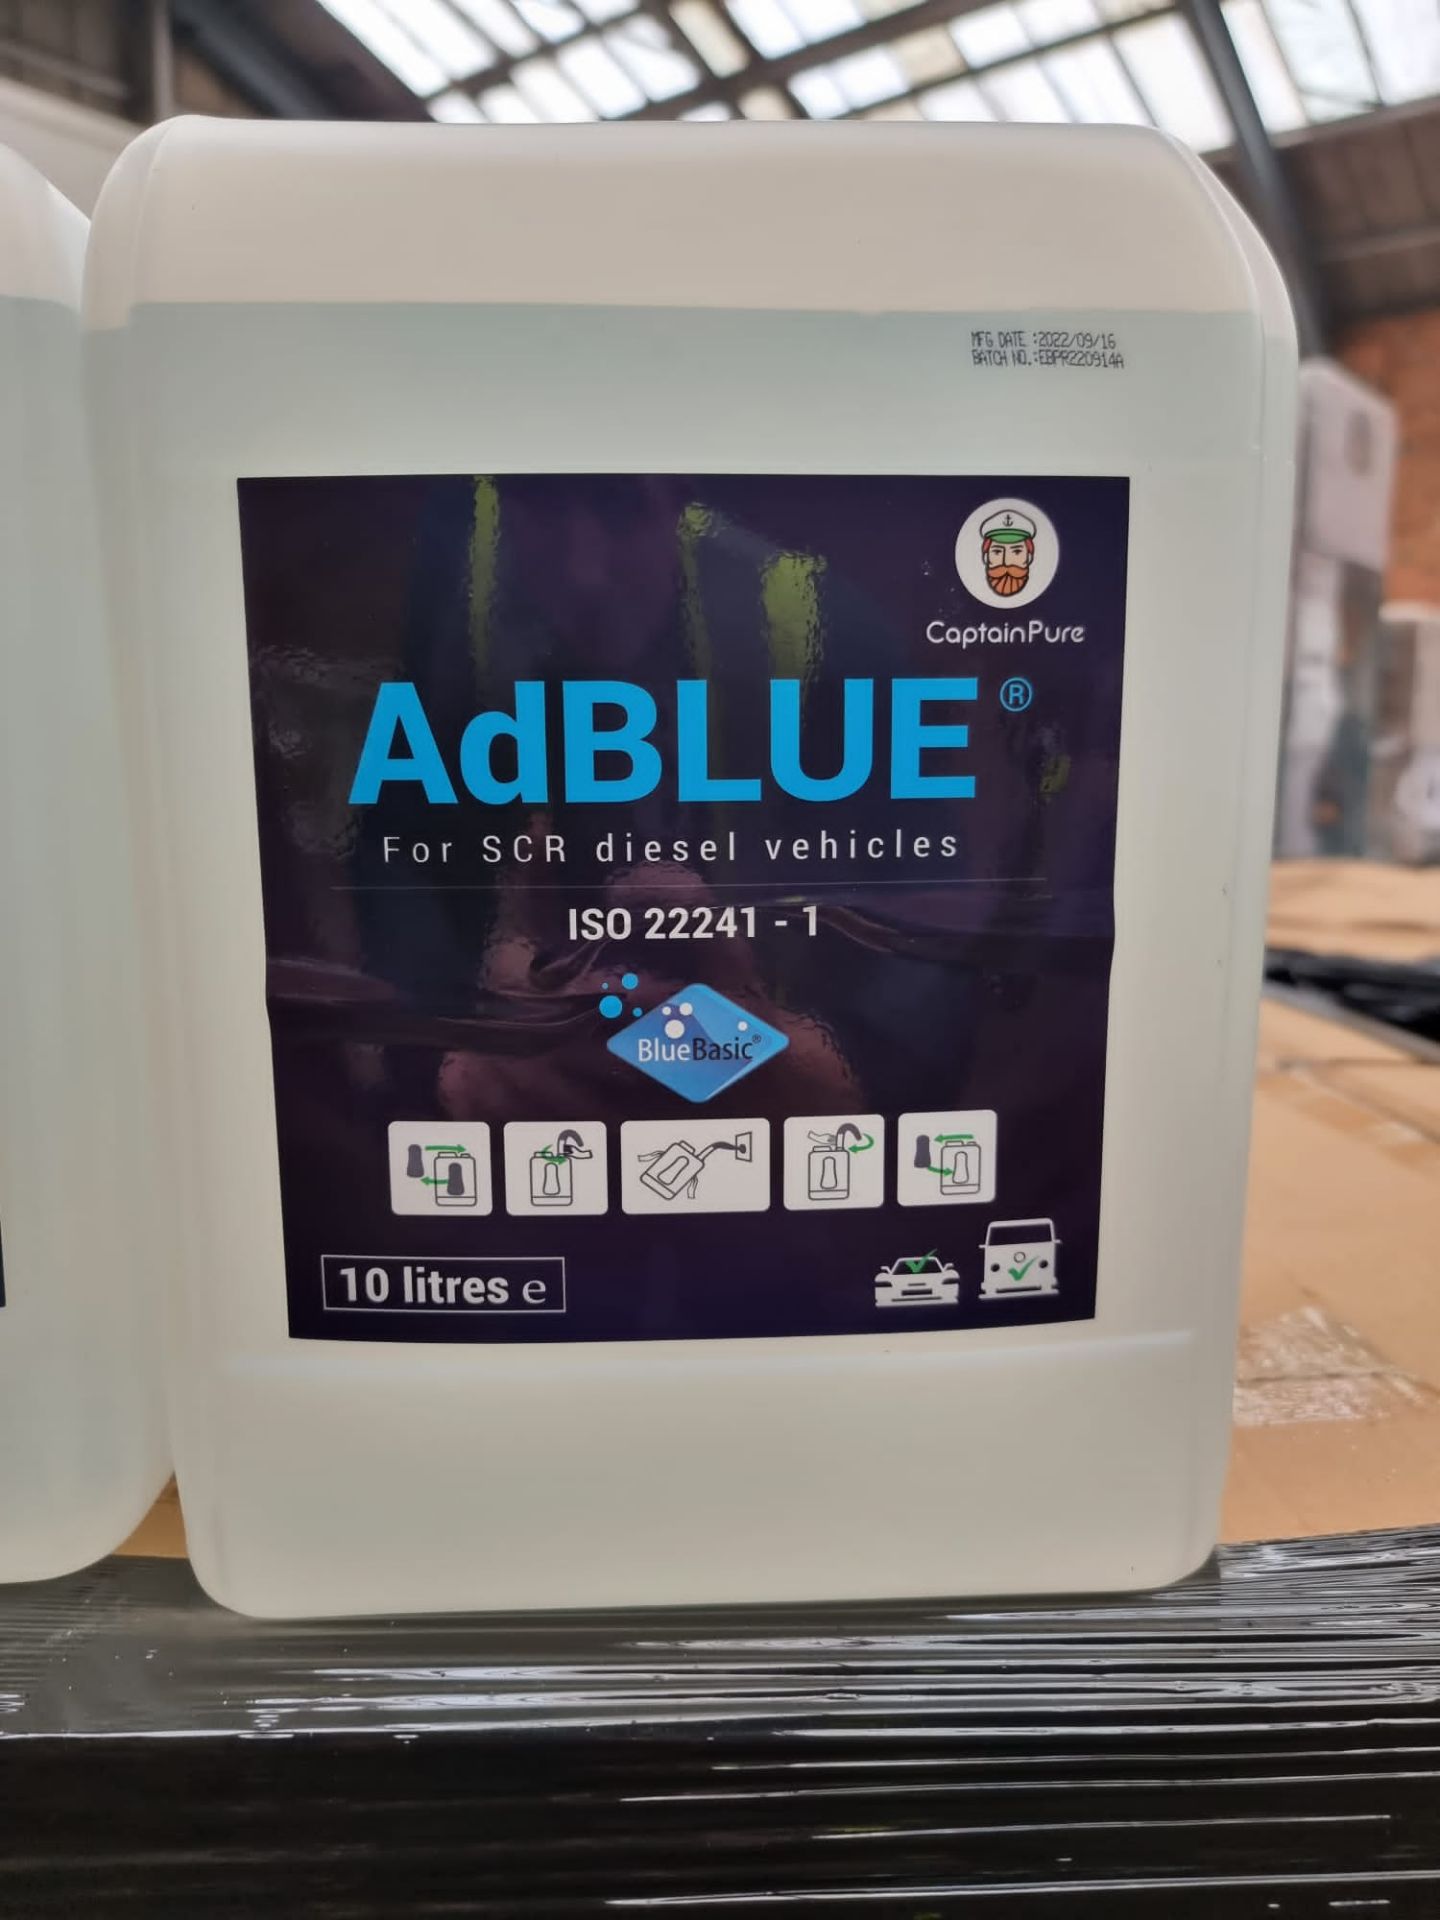 3 x NEW SEALED 10L TUBS OF ADBLUE FOR DIESEL VEHICLES. INCLUDES NOZZLE. AdBlue is the registered